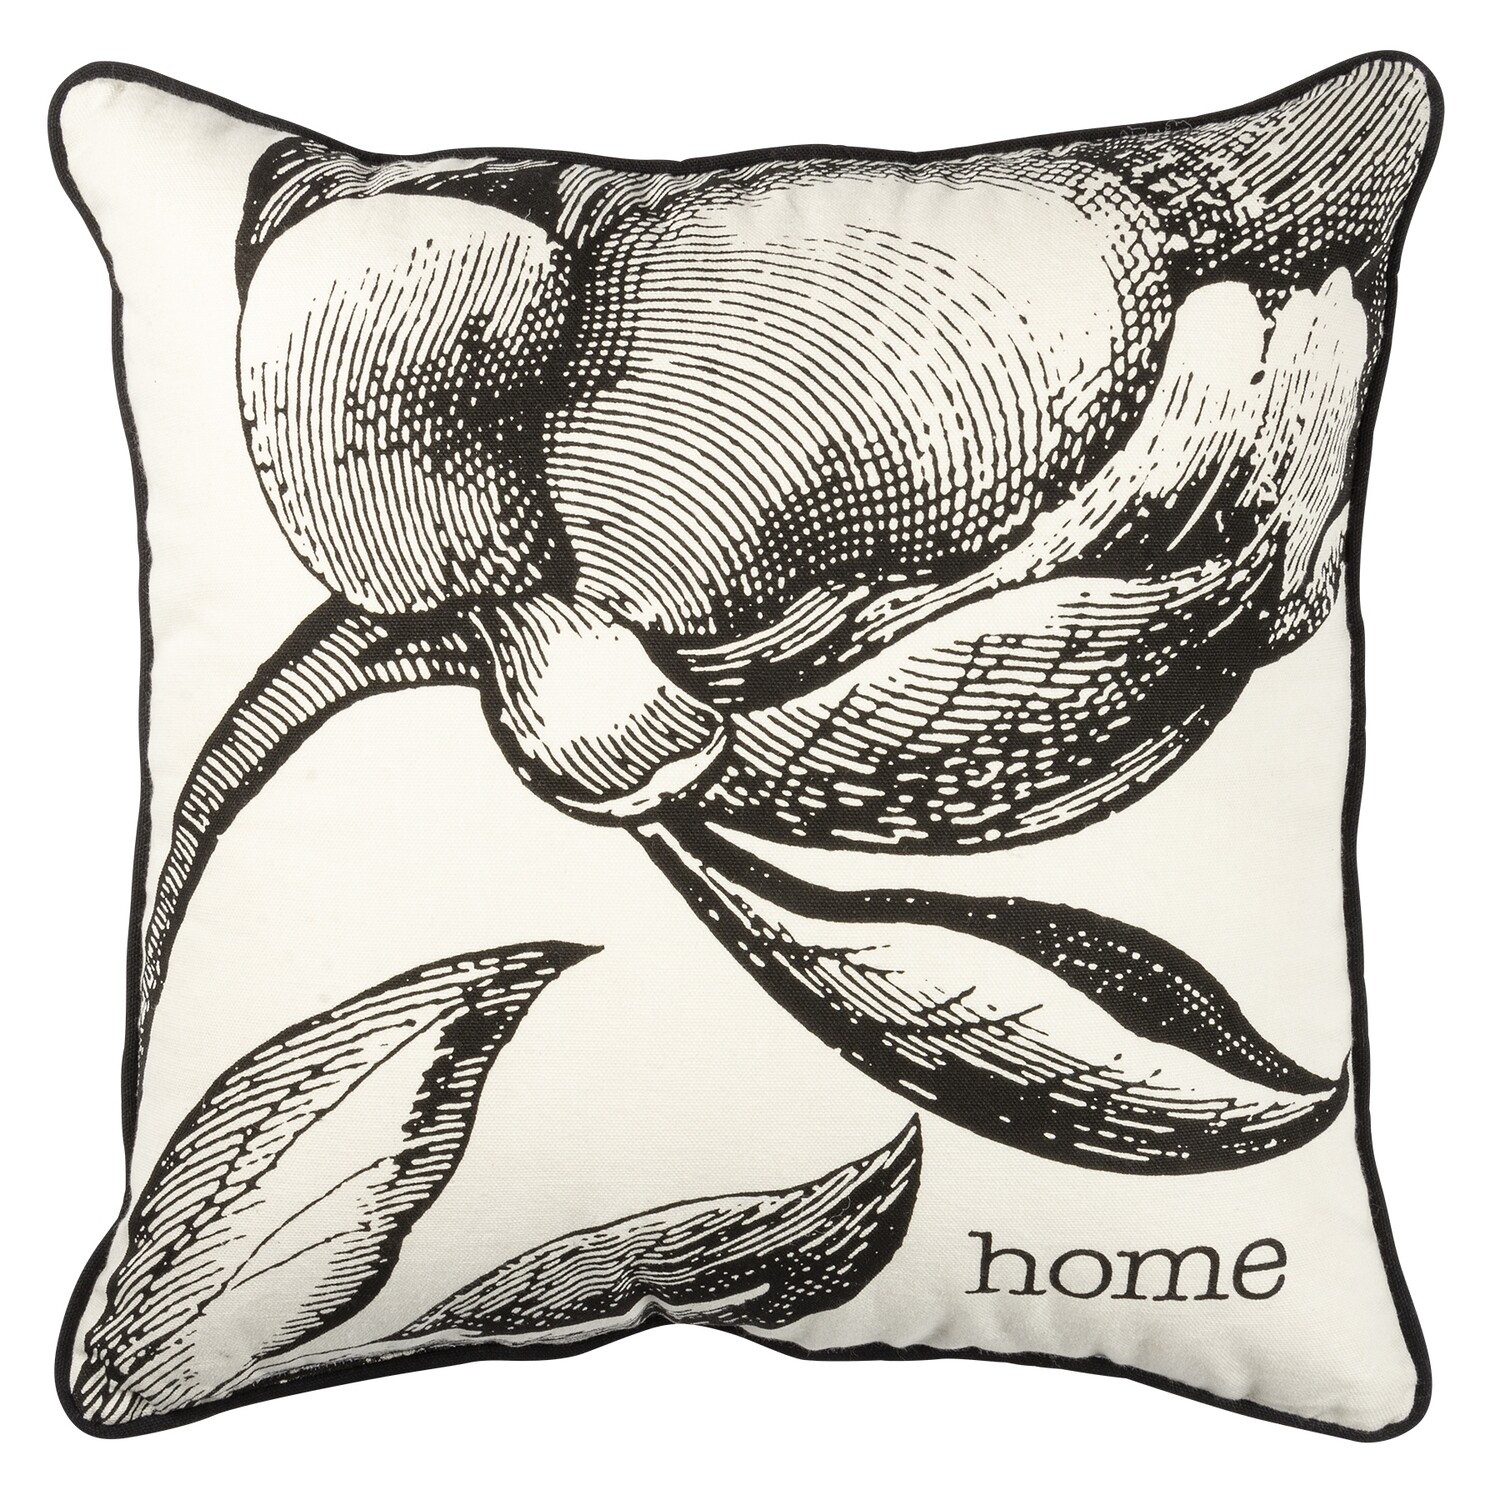 Home Floral Pillow